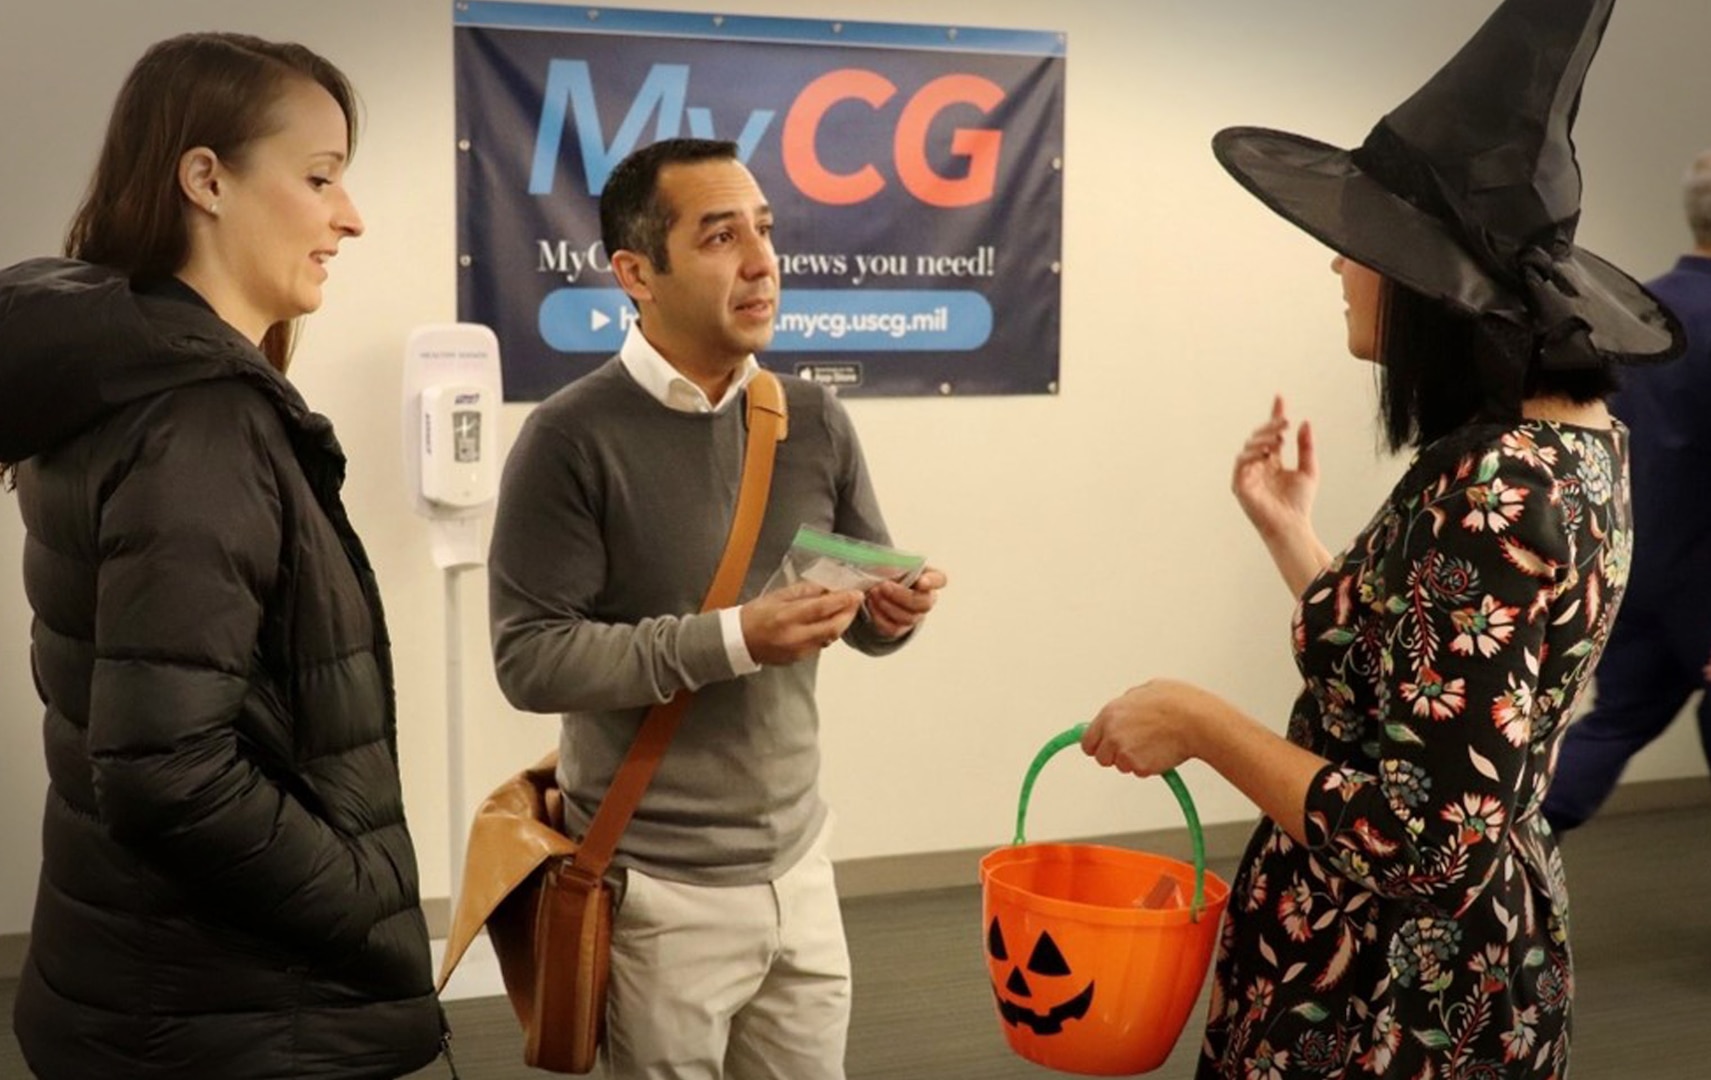 DHS Leader Development Program Manager Alyssa Lombardi (right) handing out Halloween candy to the Coast Guard workforce at headquarters to raise awareness of DHS Leader Grams.